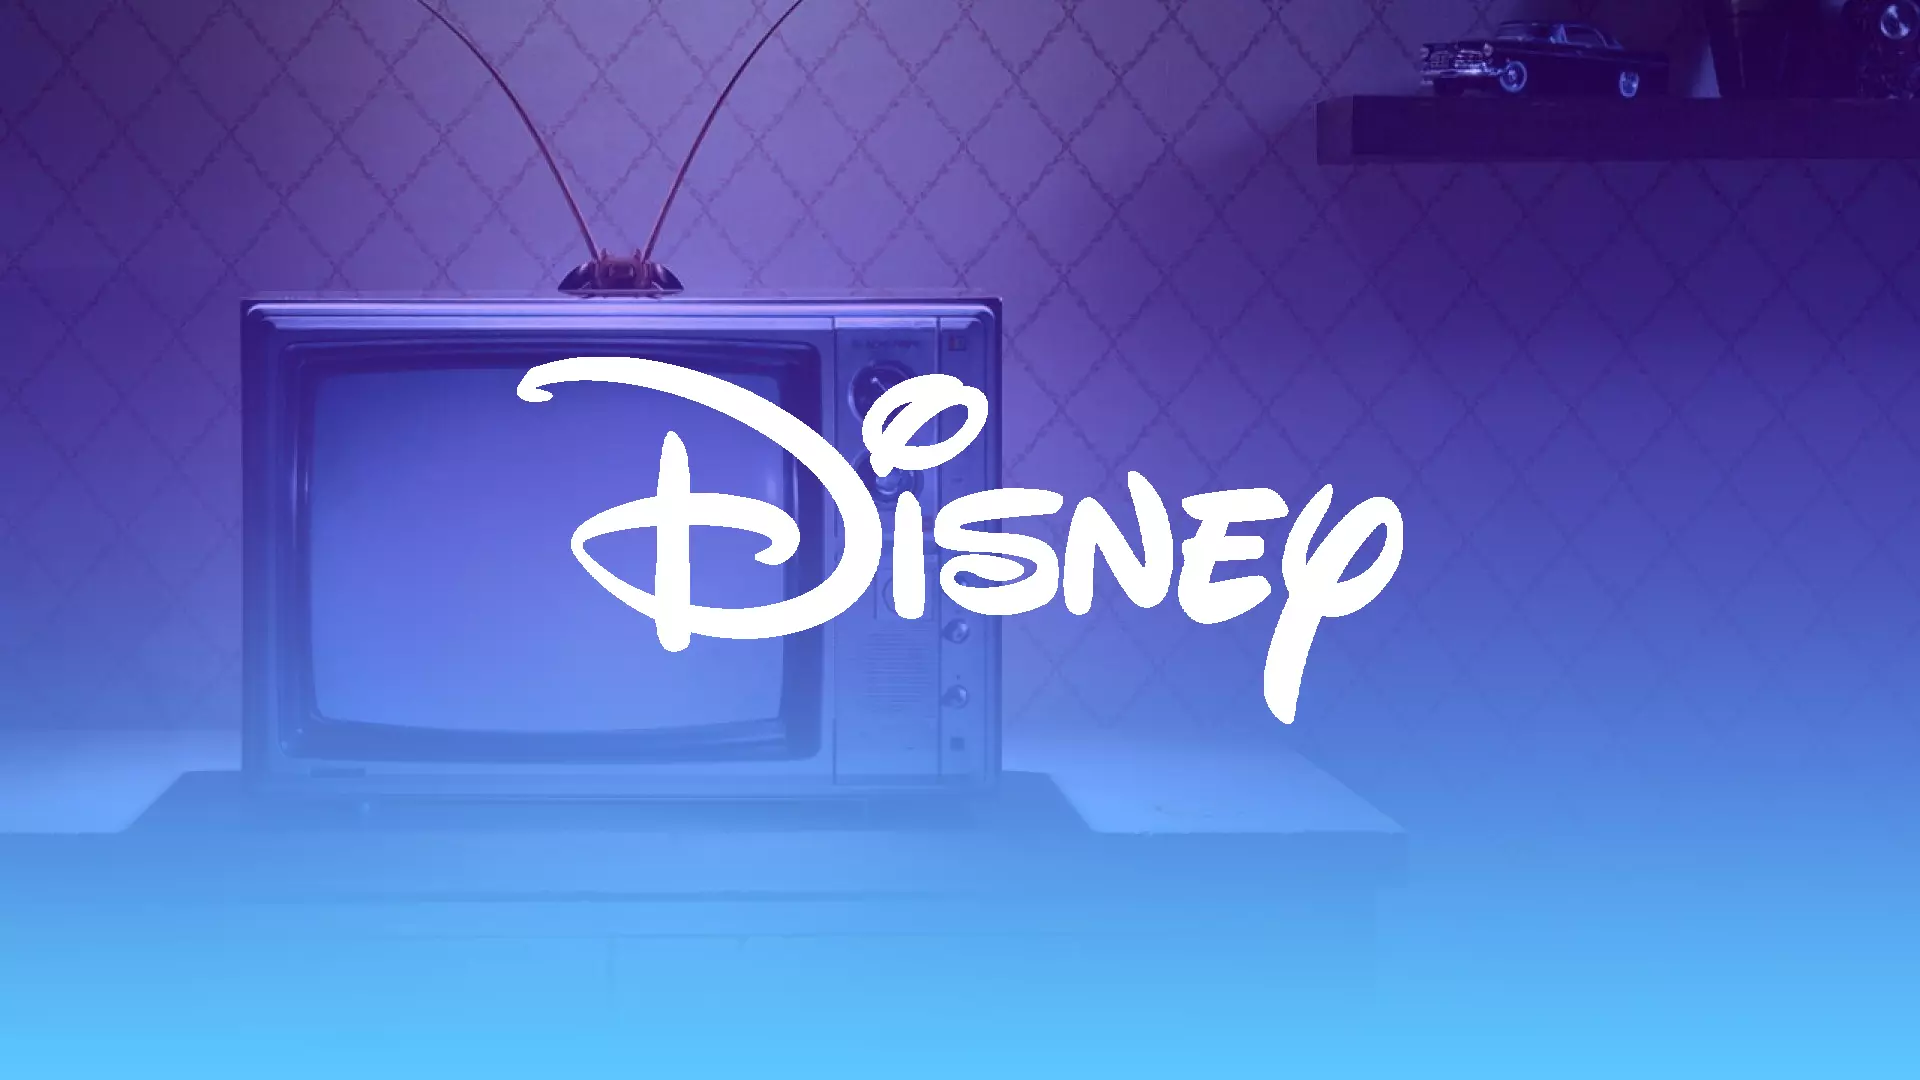 Disney stations return to Dish and Sling TV channels after a tentative agreement